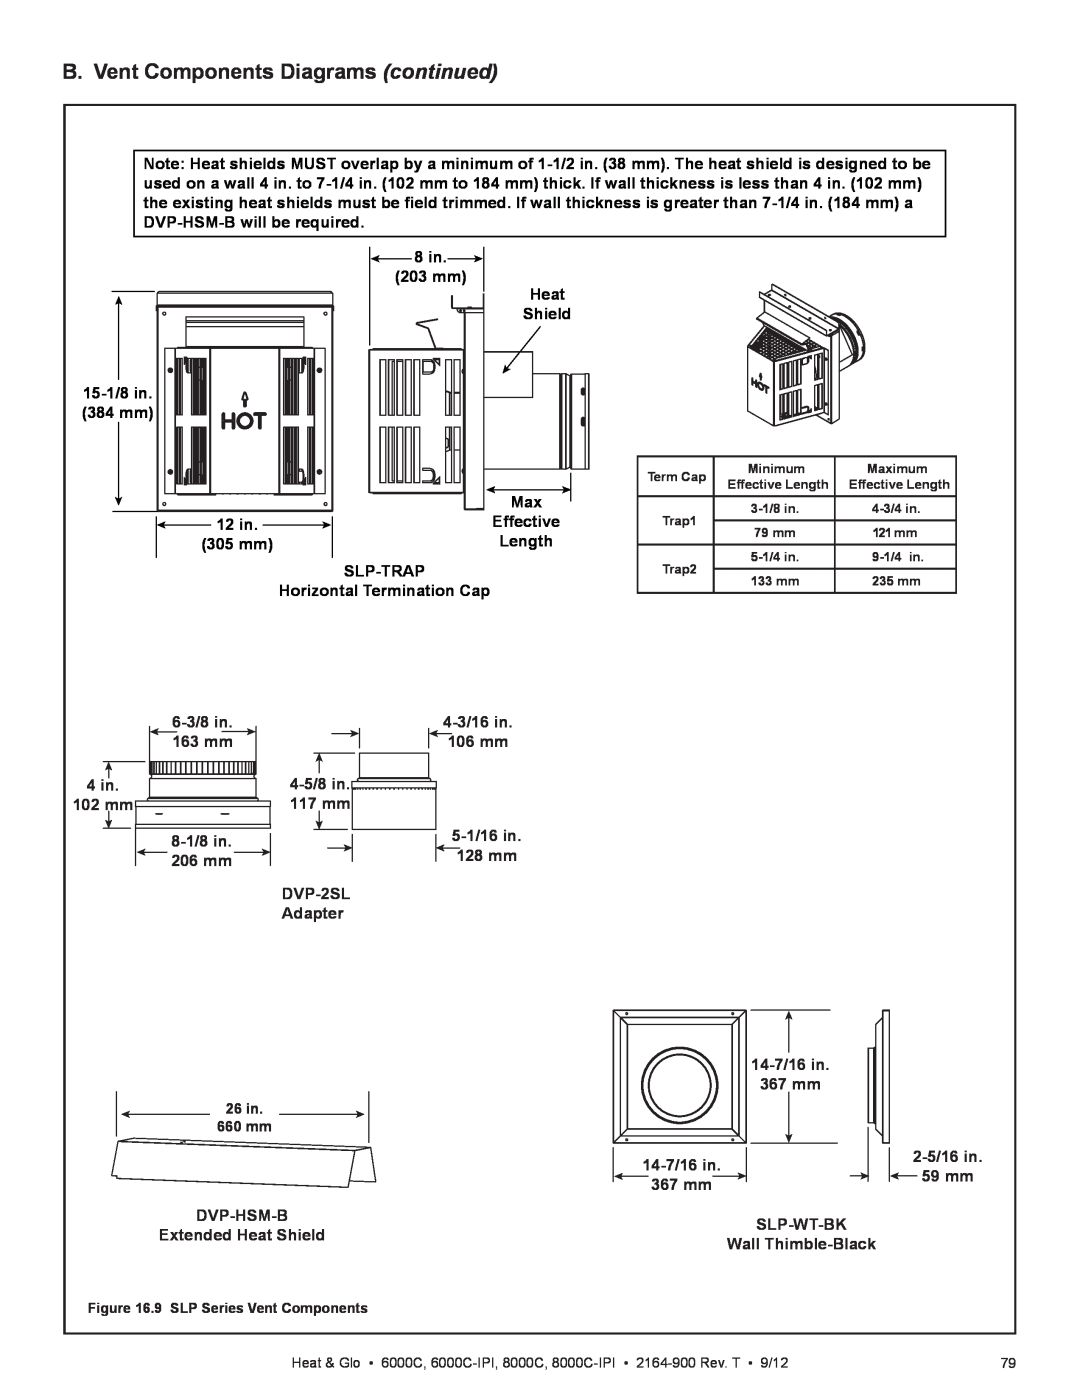 Heat & Glo LifeStyle 6000C manual B. Vent Components Diagrams continued, 8 in.203 mm Heat Shield 15-1/8in 384 mm 